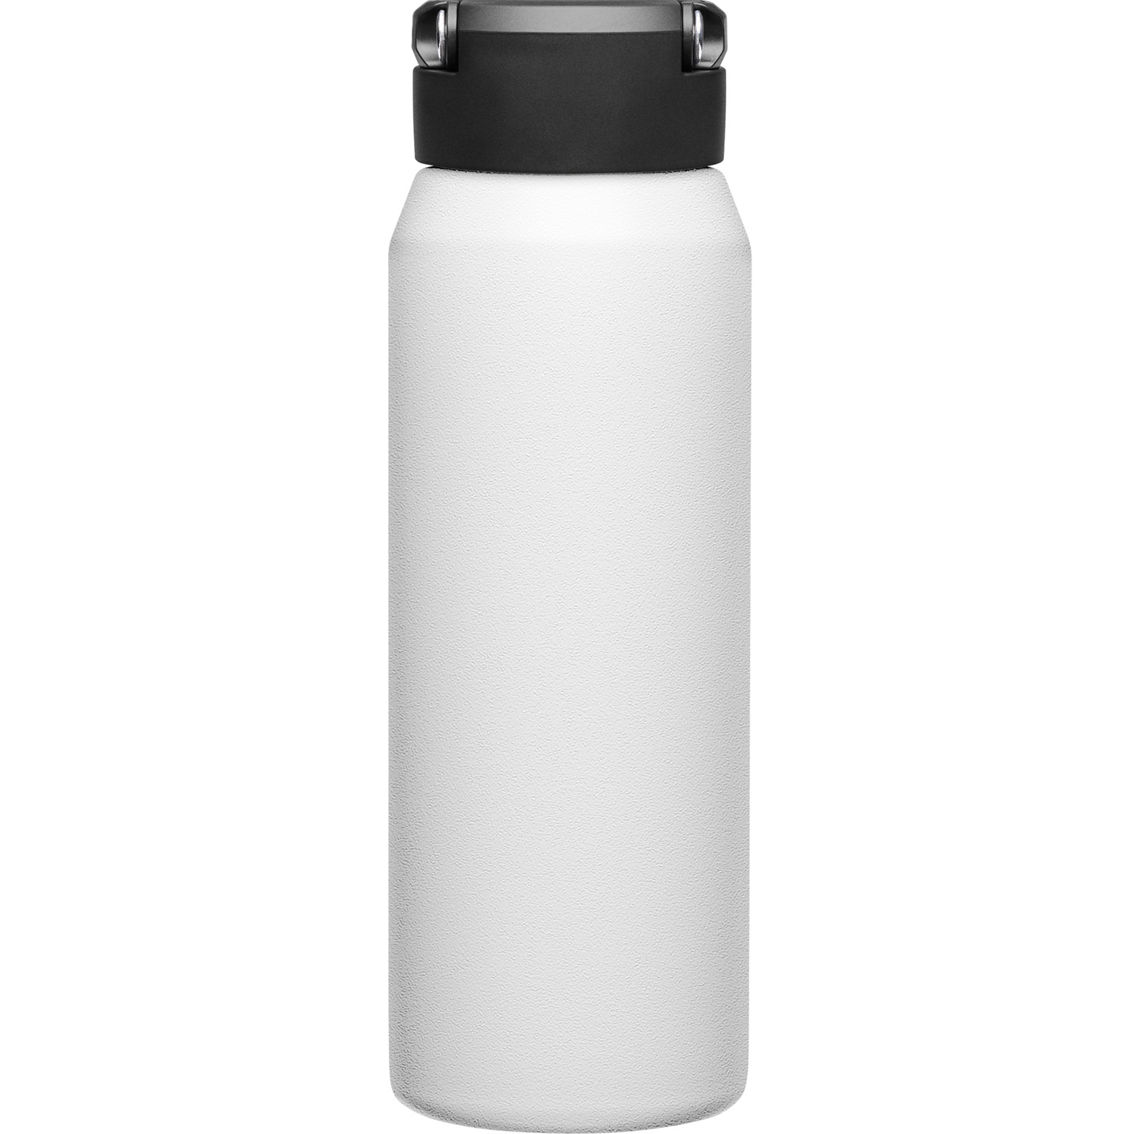 Camelbak Fit Cap Insulated Stainless Steel Water Bottle 32 oz. - Image 6 of 8